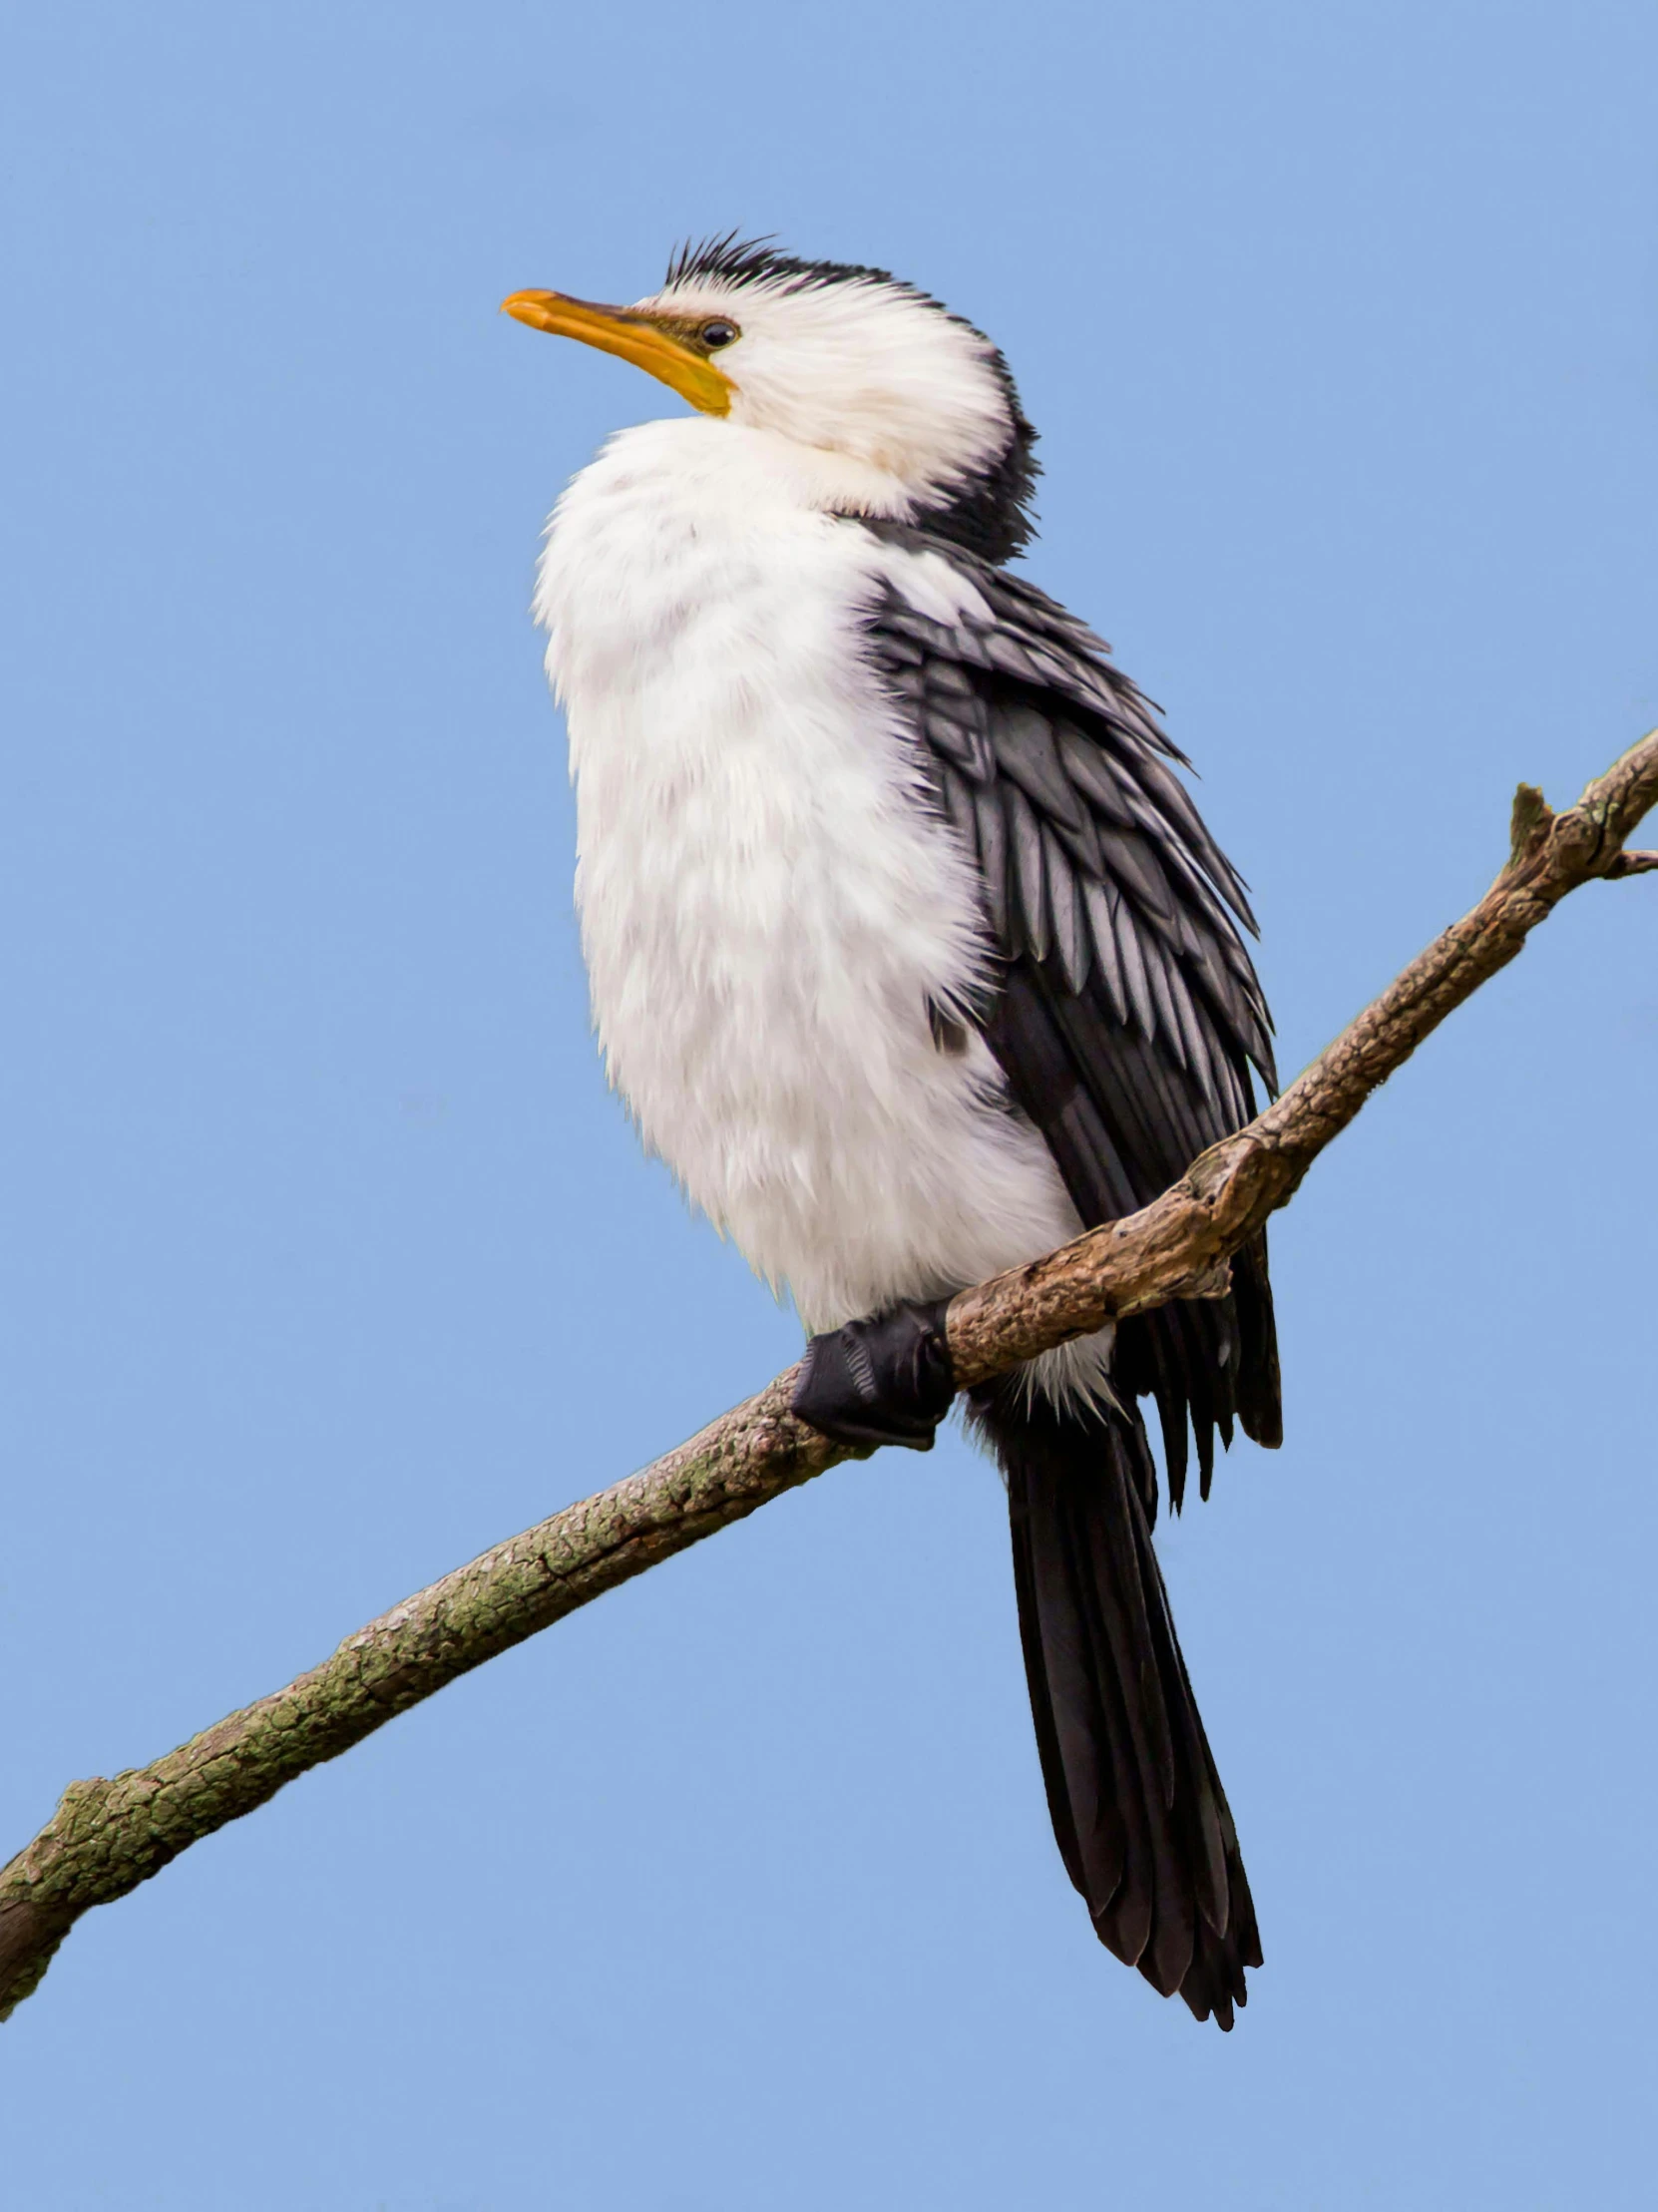 black and white bird perched on twig in blue sky